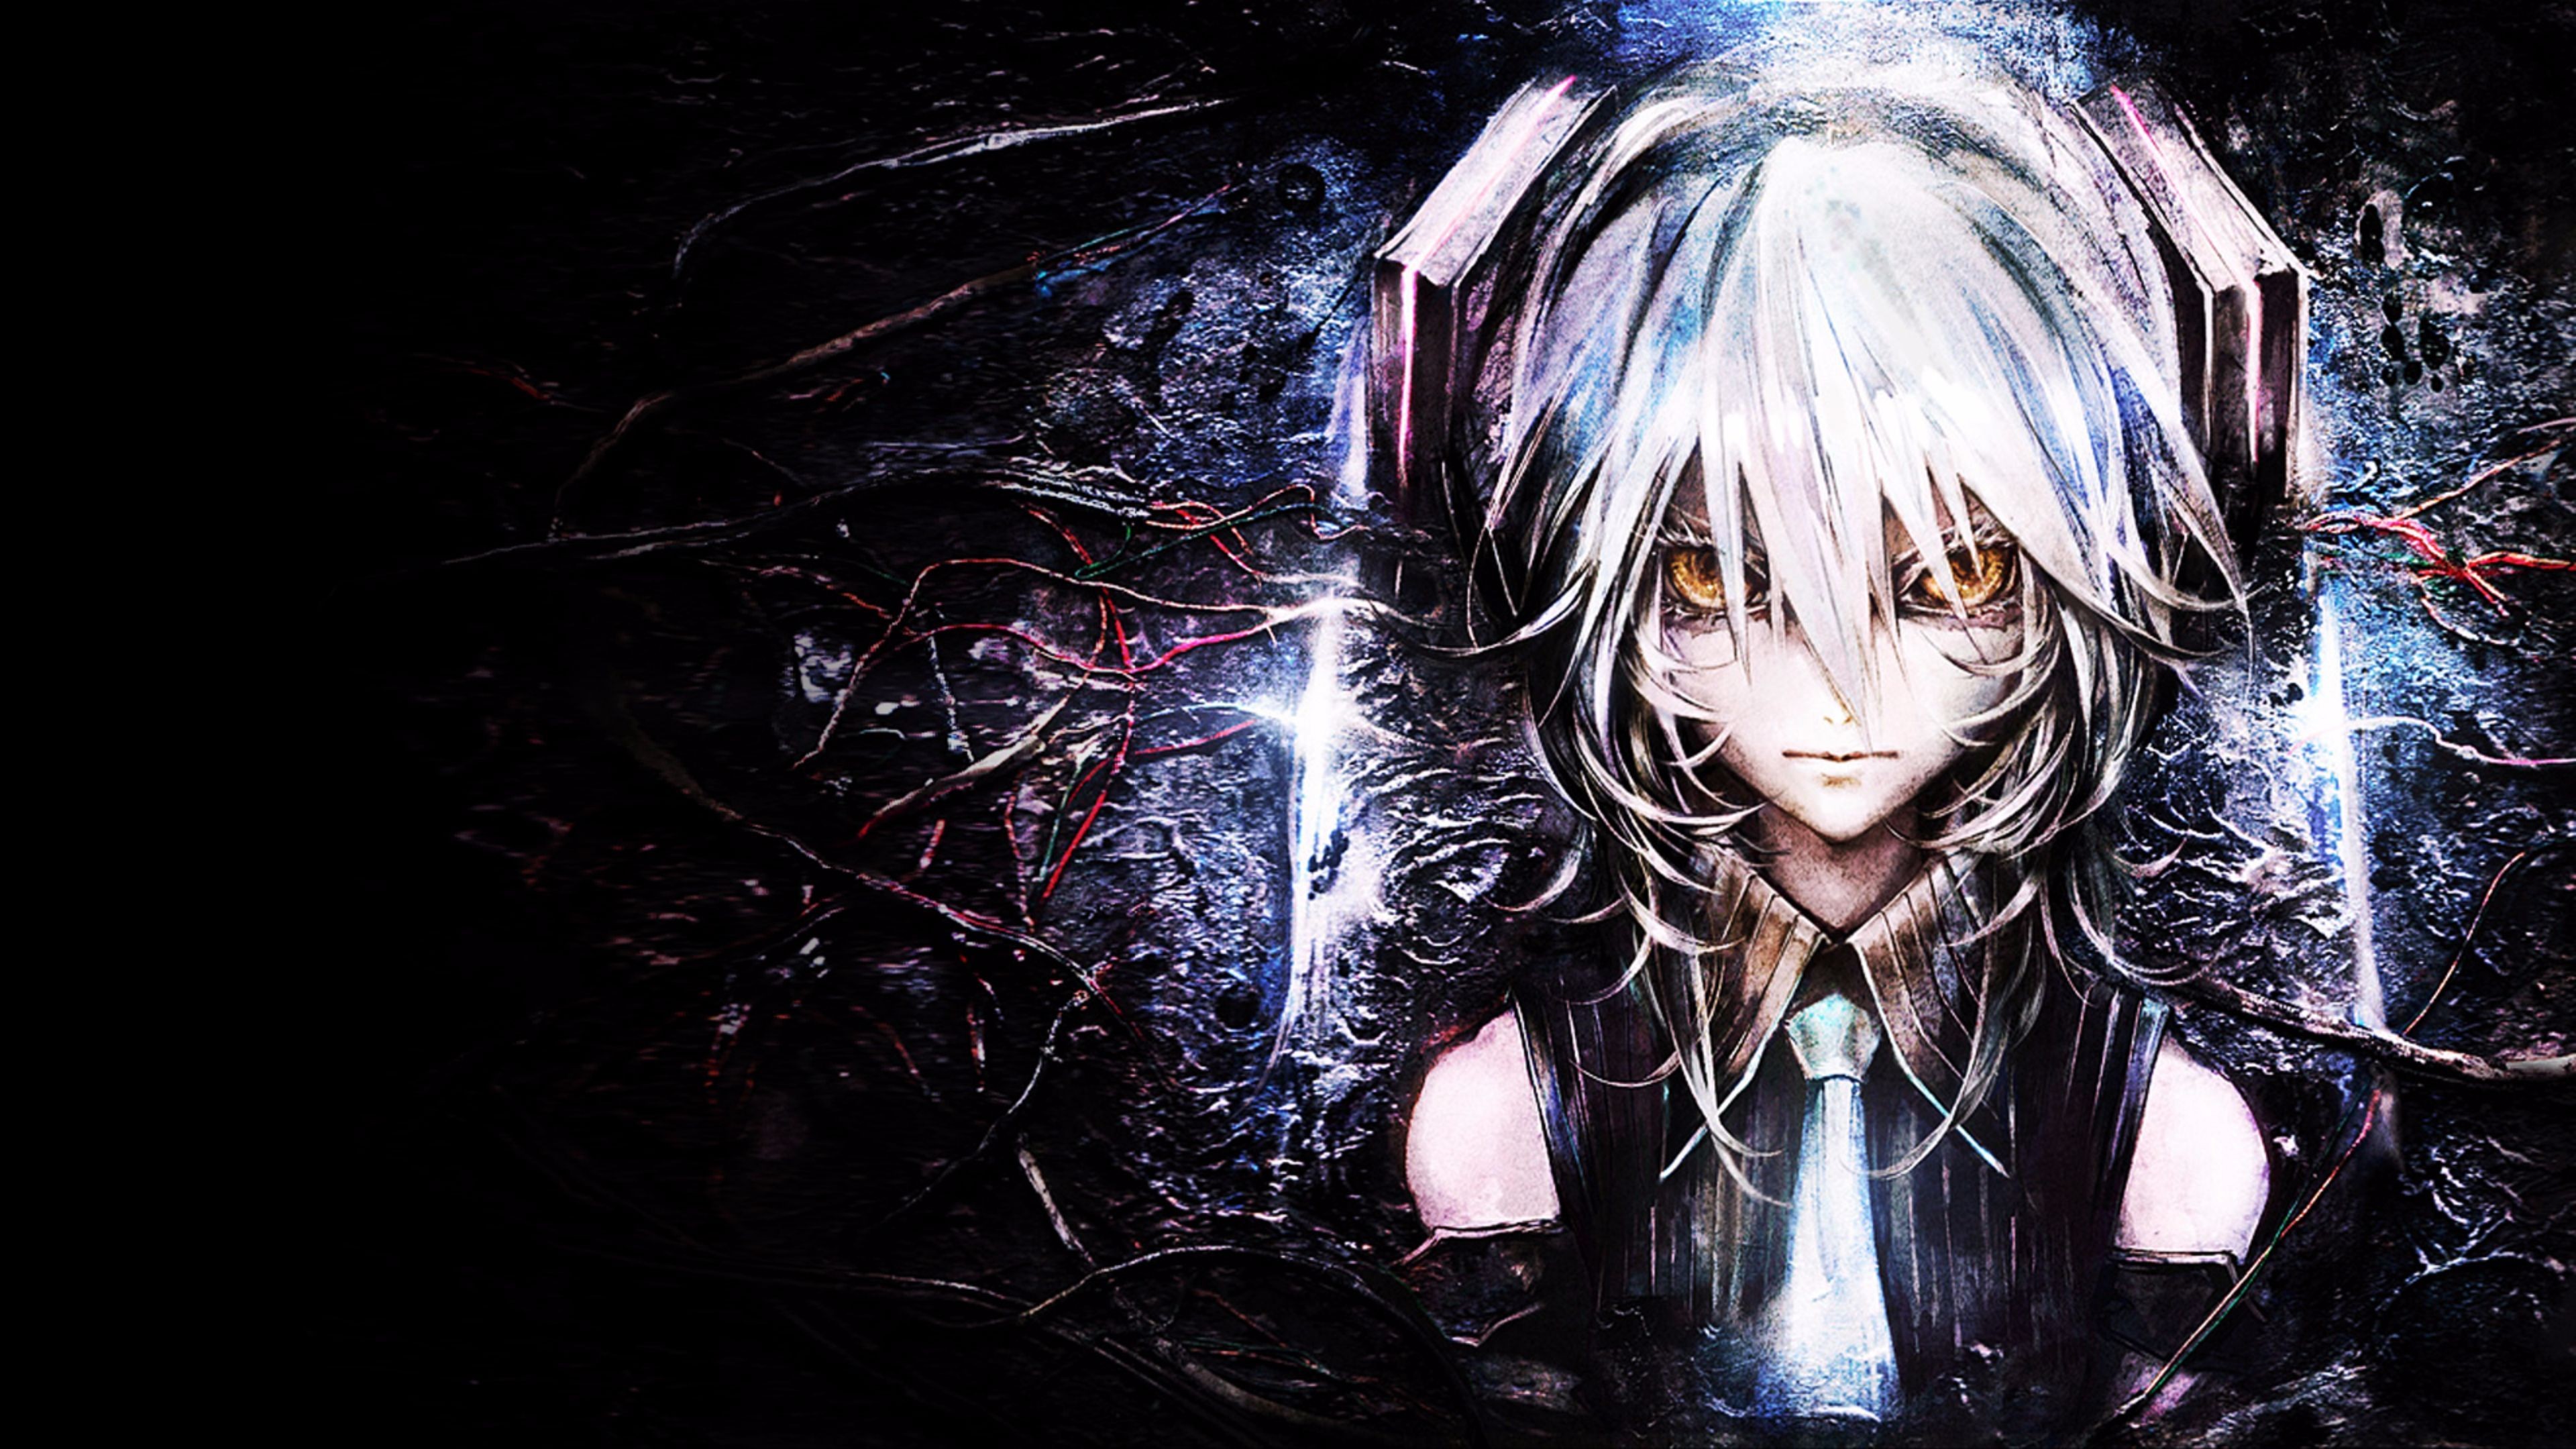 4K Anime wallpaper ·① Download free full HD wallpapers for ...